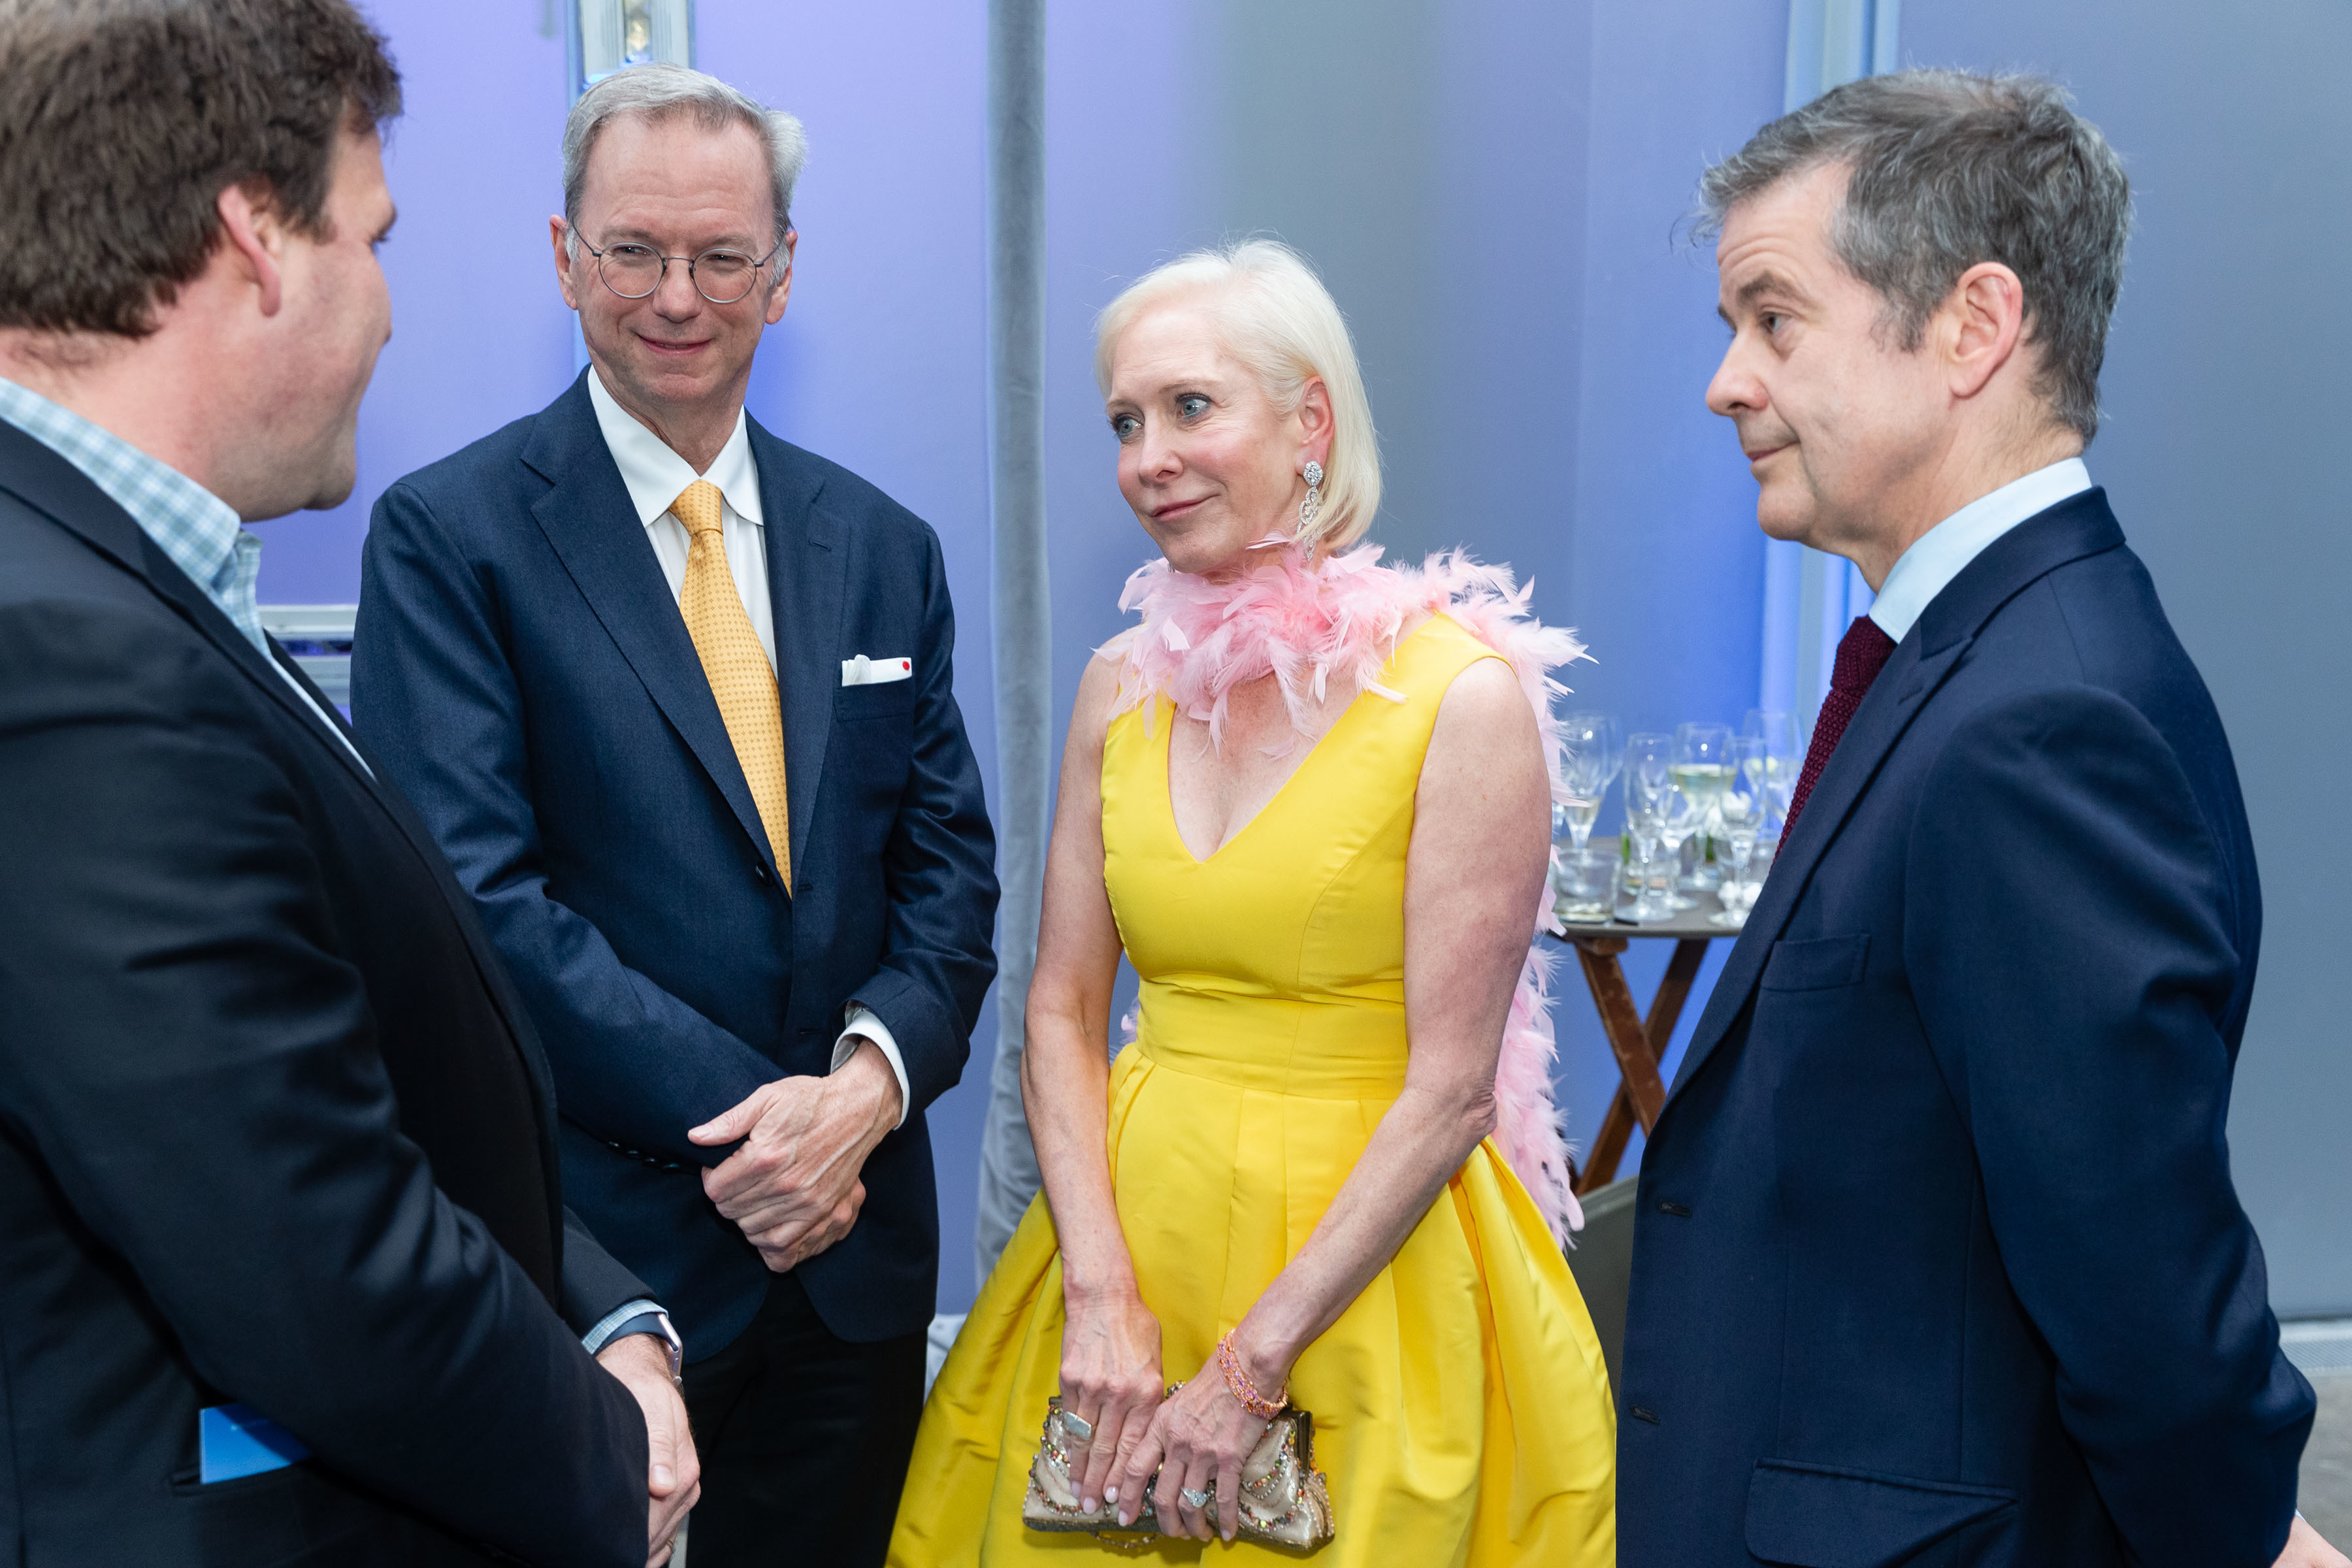 Above: Buckhill Capital founder Henrik Jones in conversation with former Google chairman Eric Schmidt, his wife Wendy Schmidt, and CEO of Sustainable Apparel Coalition Jason Kibbey at Big Bang Gala 2019 on April 25th 2019 at California Academy of Sciences